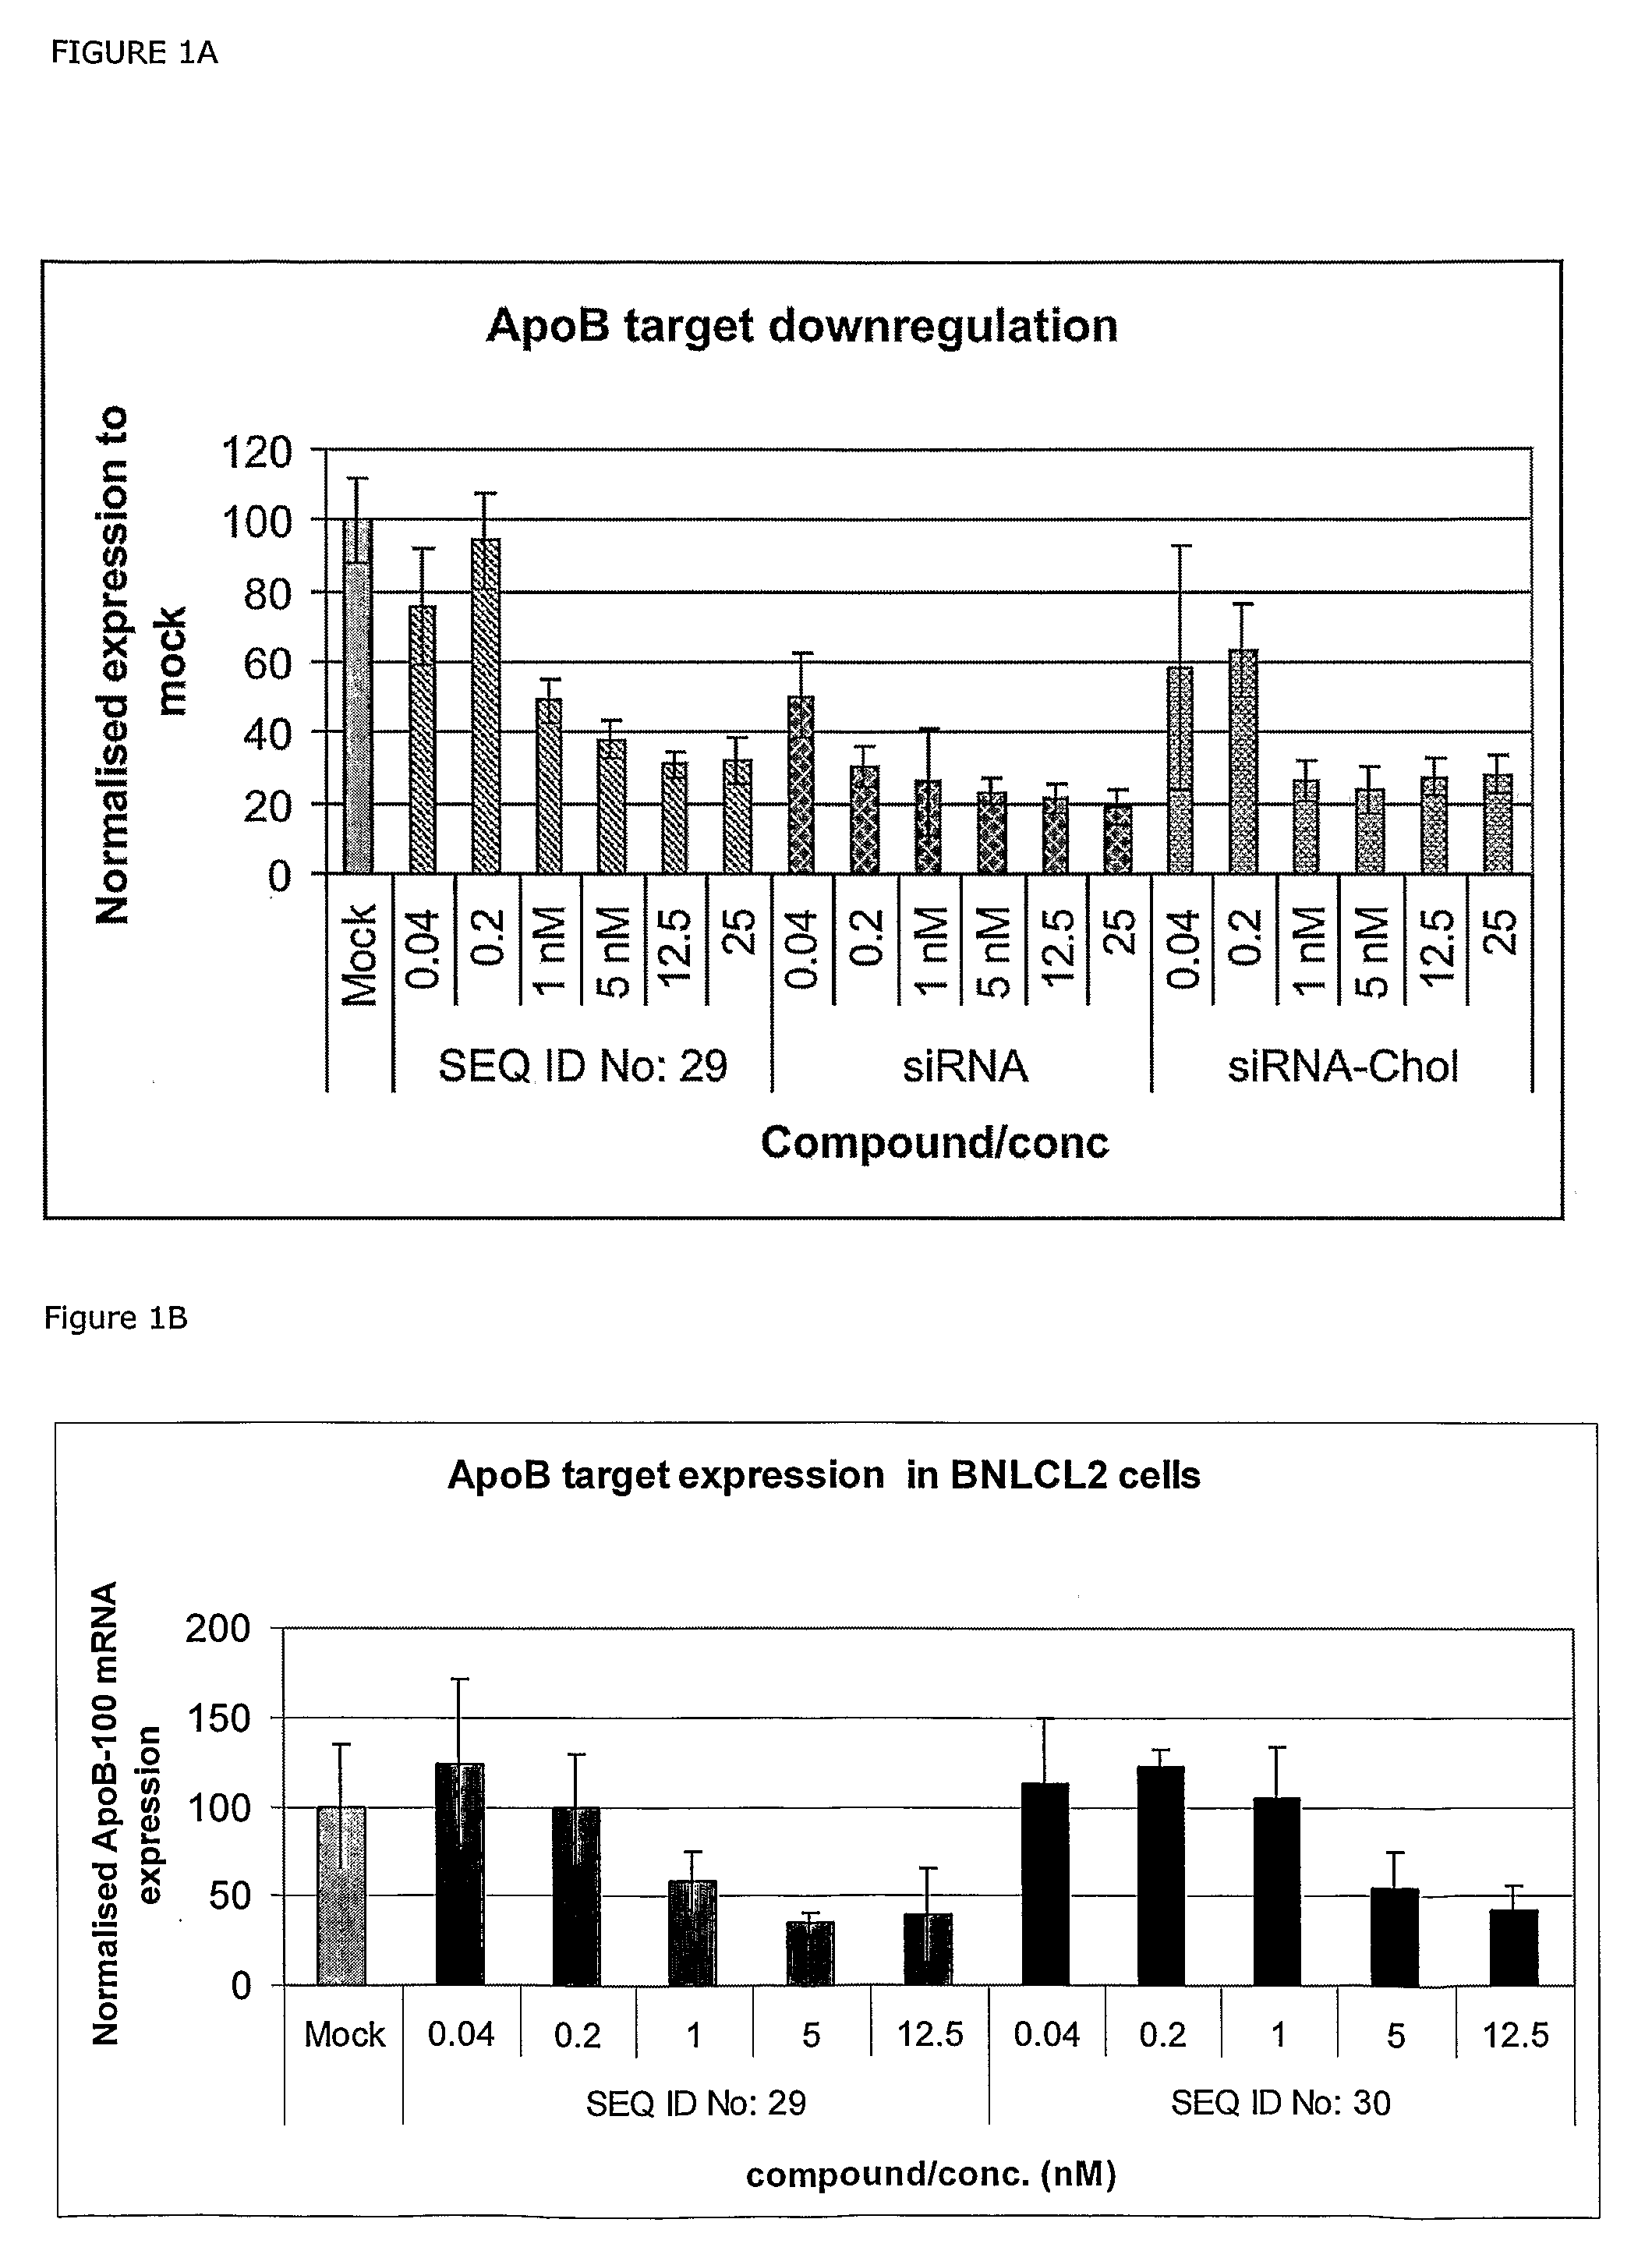 RNA antagonist compounds for the inhibition of apo-b100 expression